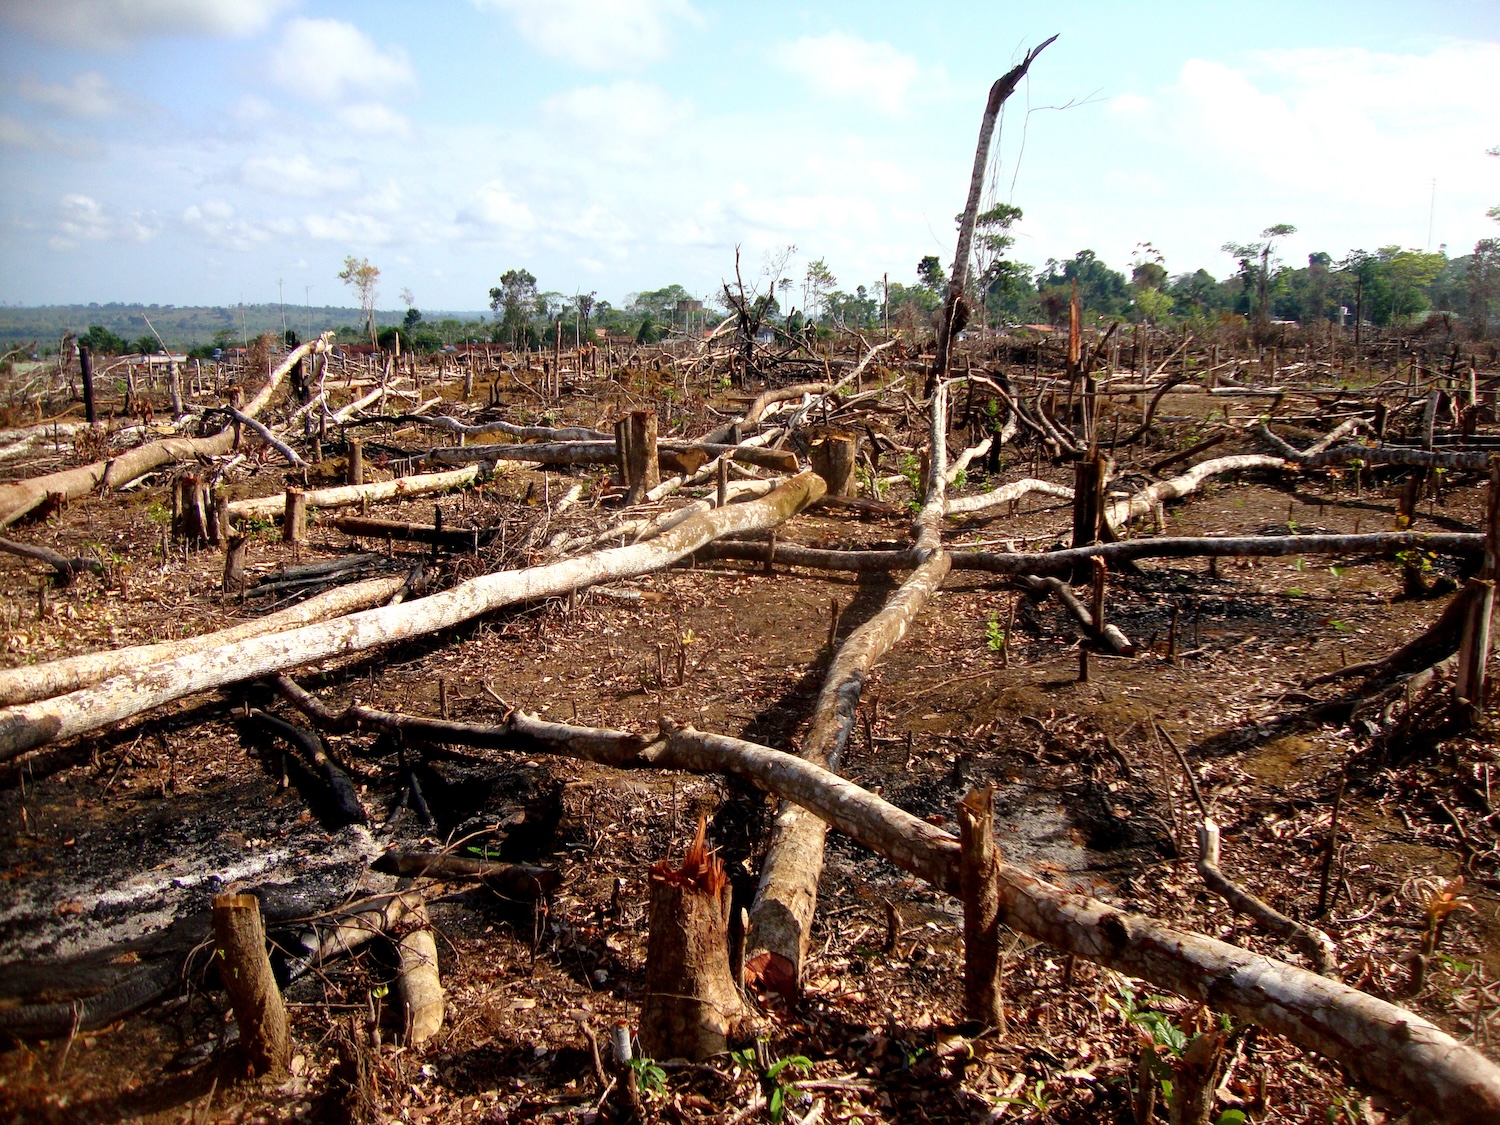 Large-scale deforestation razing land for agriculture and pasture is one of the chief threats facing isolated indigenous societies in the Amazonian rainforests of Brazil. Photo shows razed rainforest littered with chopped down and torn trees. 